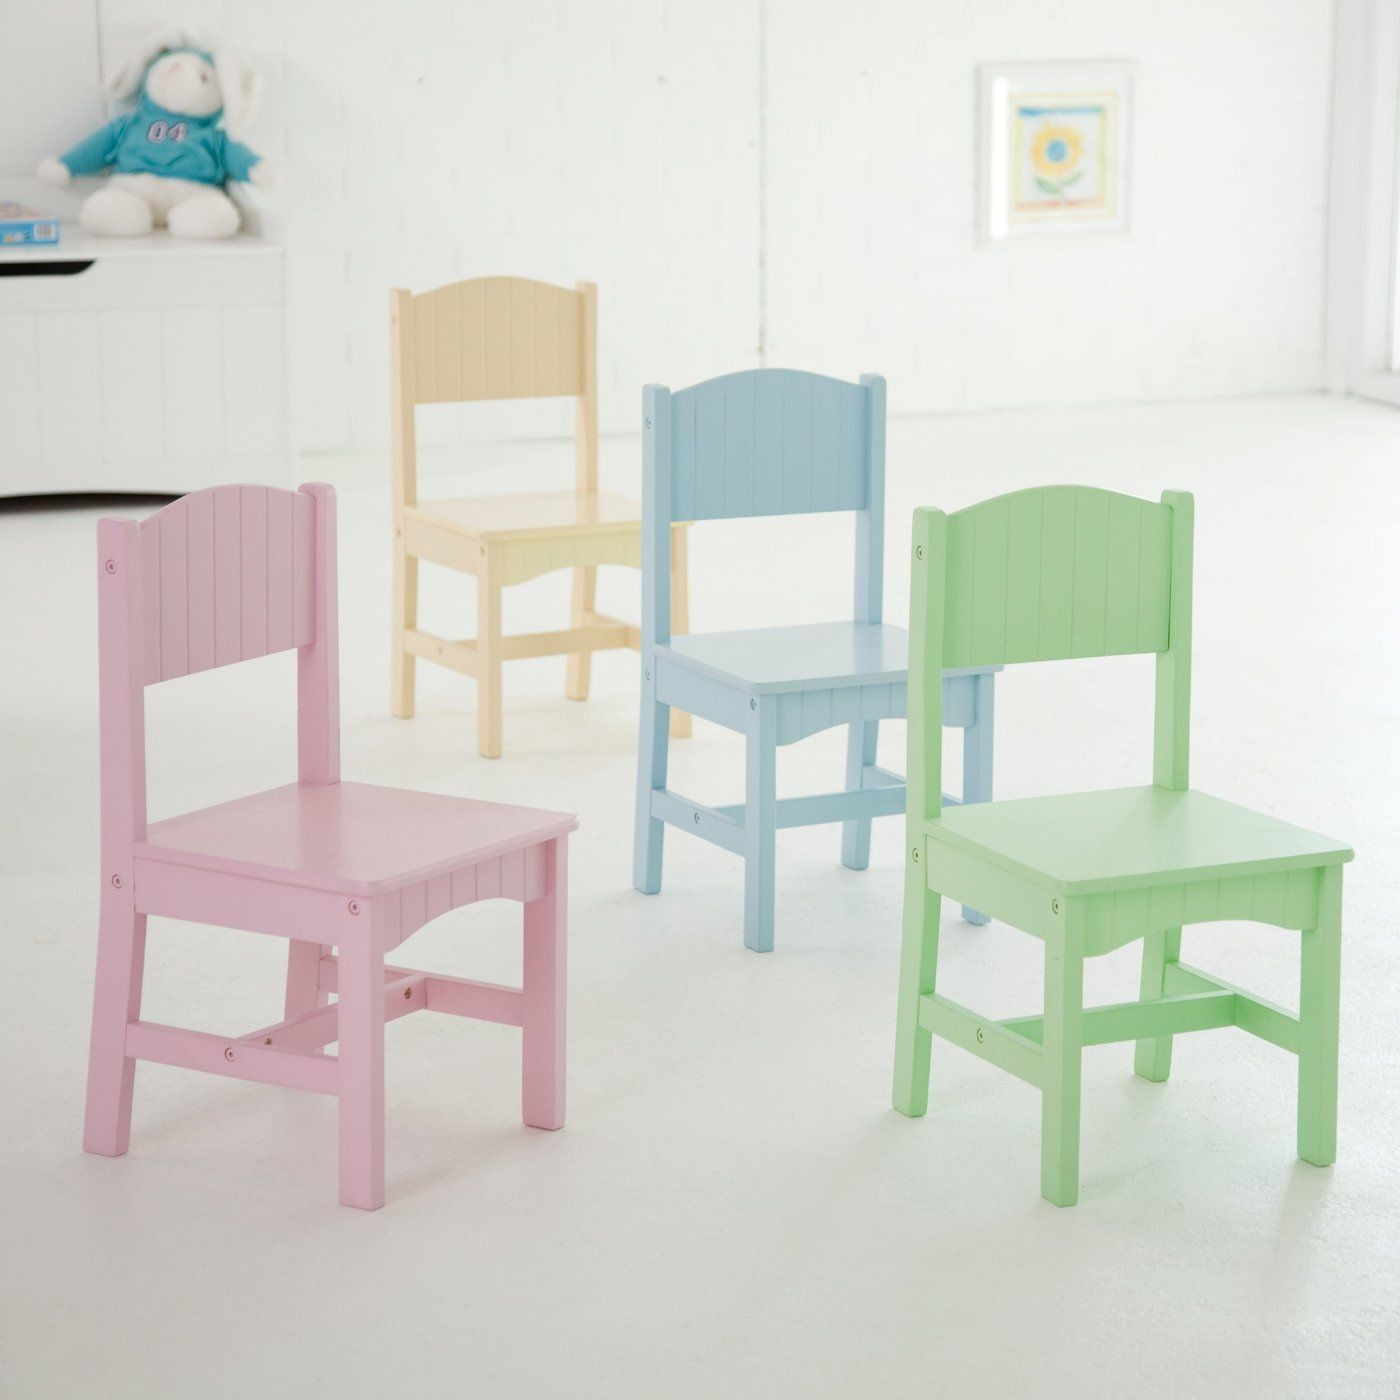 Kids Room Chair
 Kids Table Chair Set 5 Piece Furniture Children Play Room